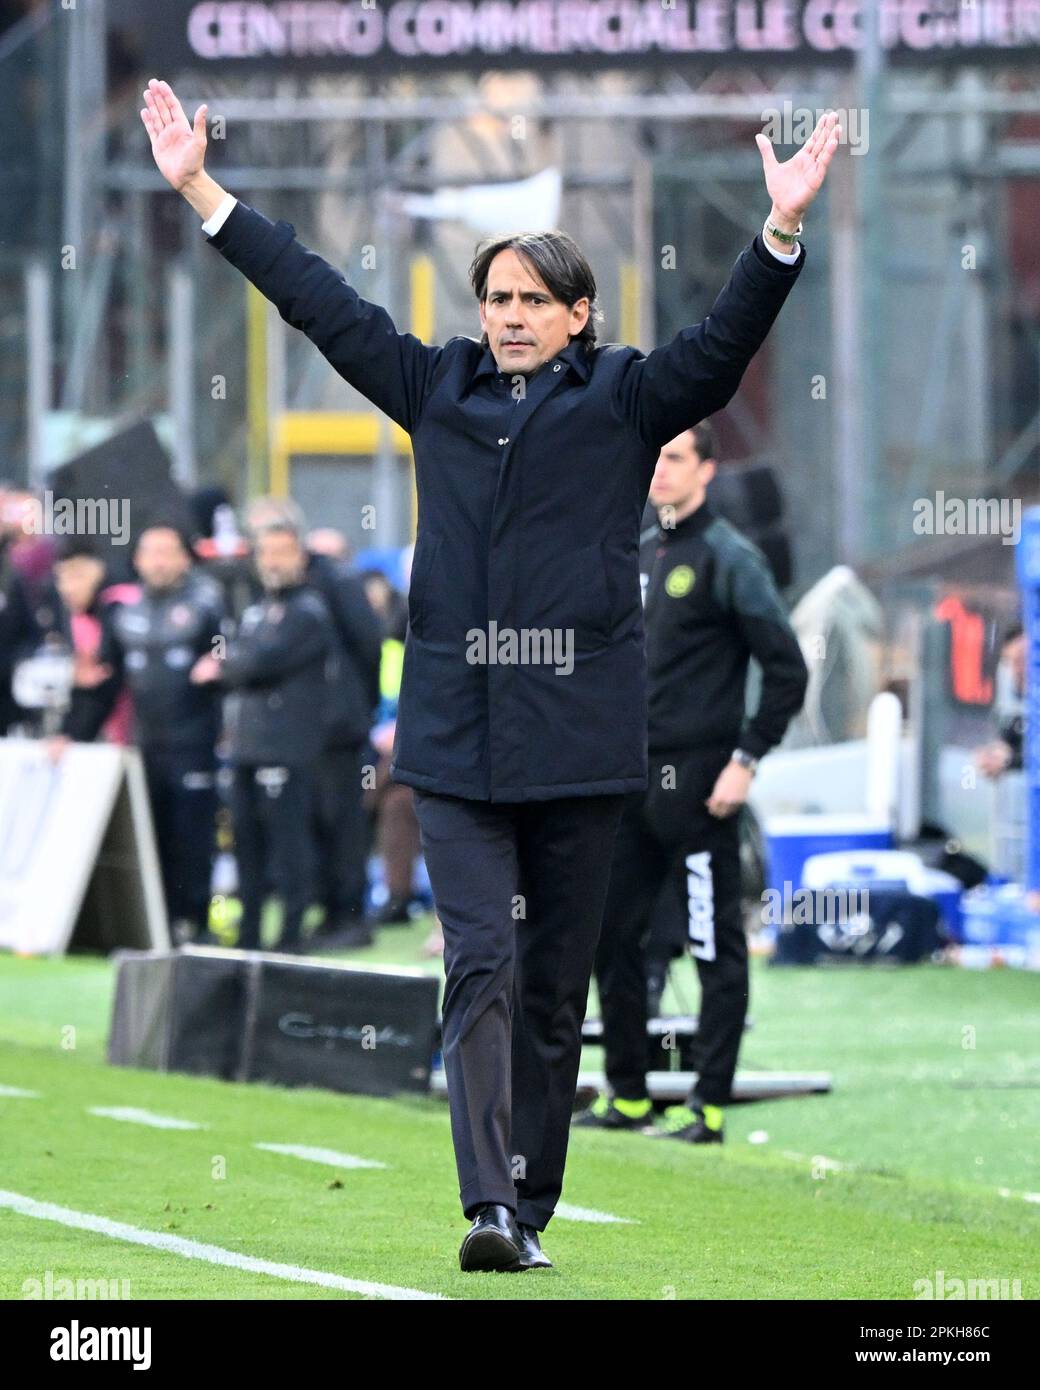 Salerno, Italy. 7th Apr, 2023. FC Inter's head coach Simone Inzaghi gestures during a Serie A football match between FC Inter and Salernitana in Salerno, Italy, on April 7, 2023. Credit: Str/Xinhua/Alamy Live News Stock Photo